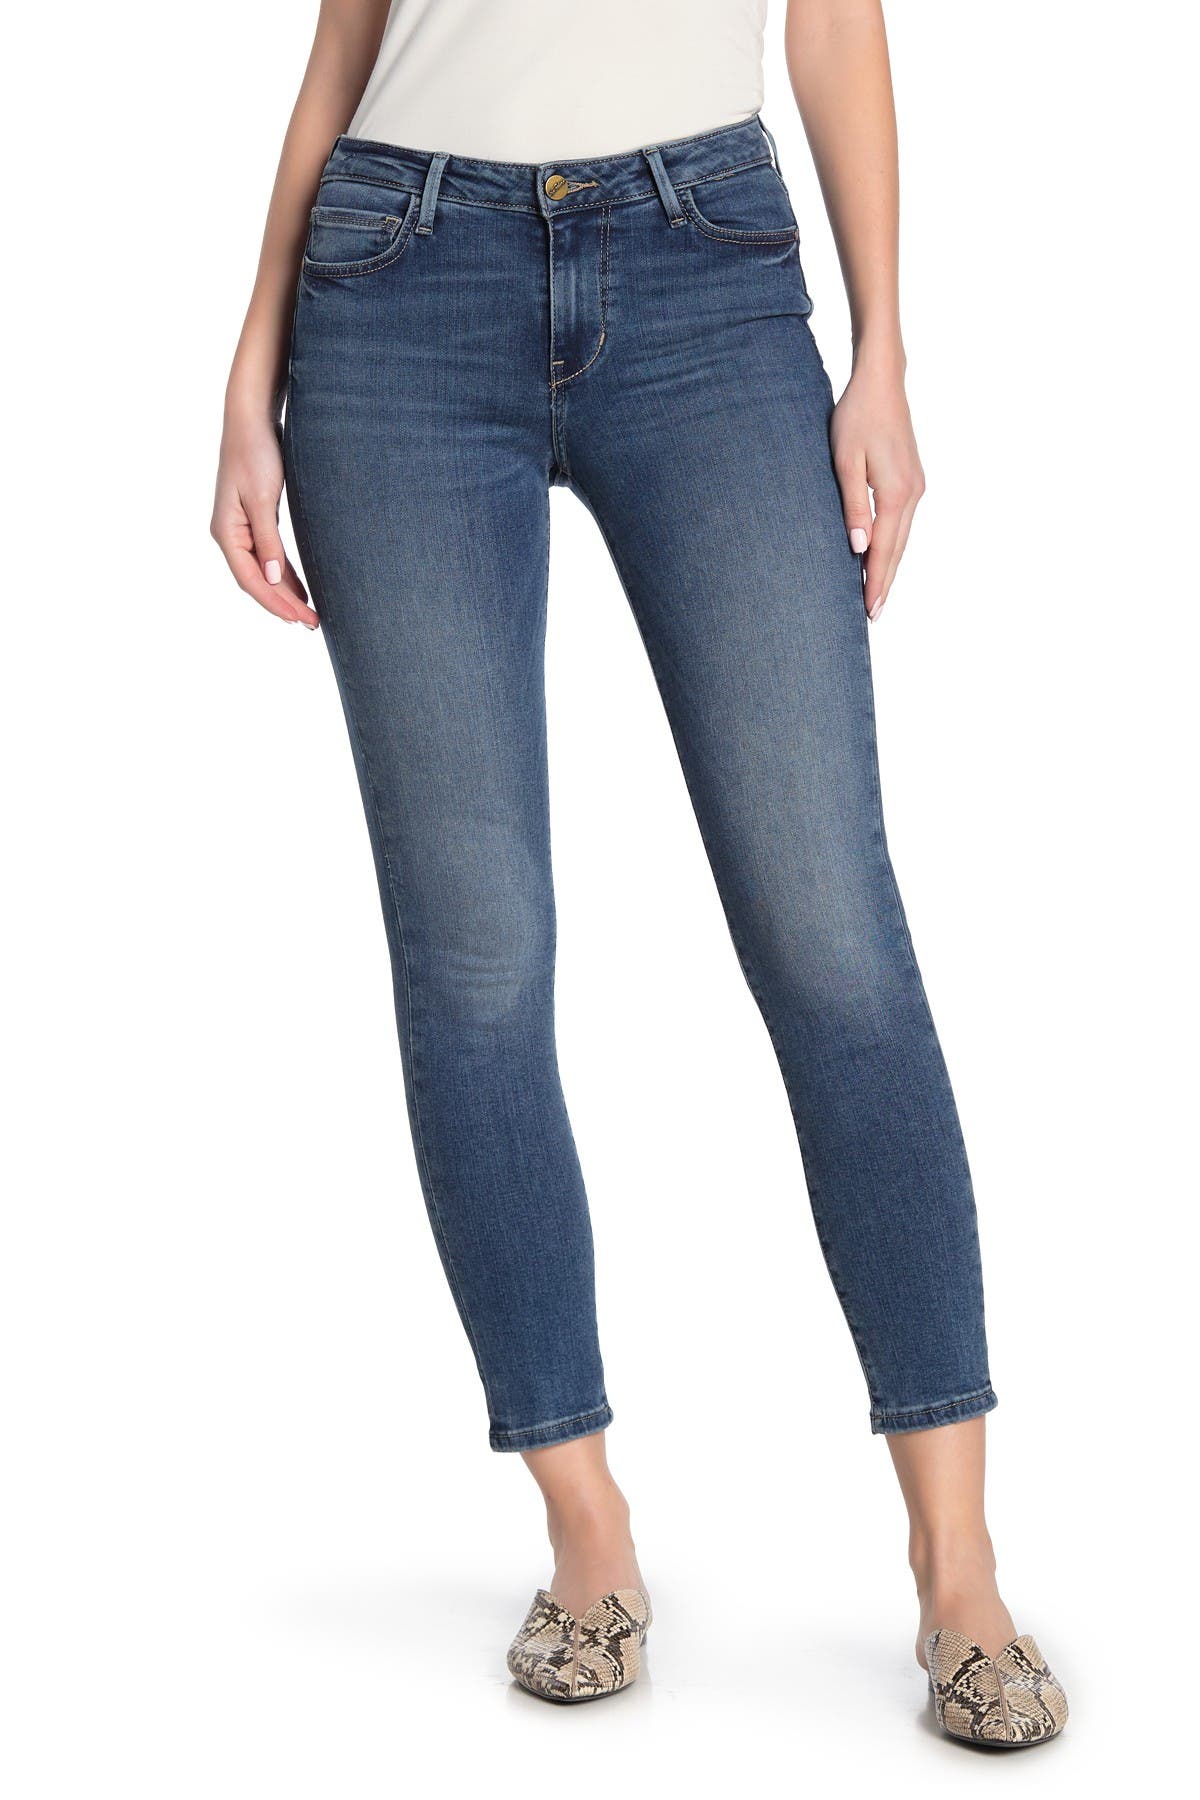 relaxed fit jeans womens levis